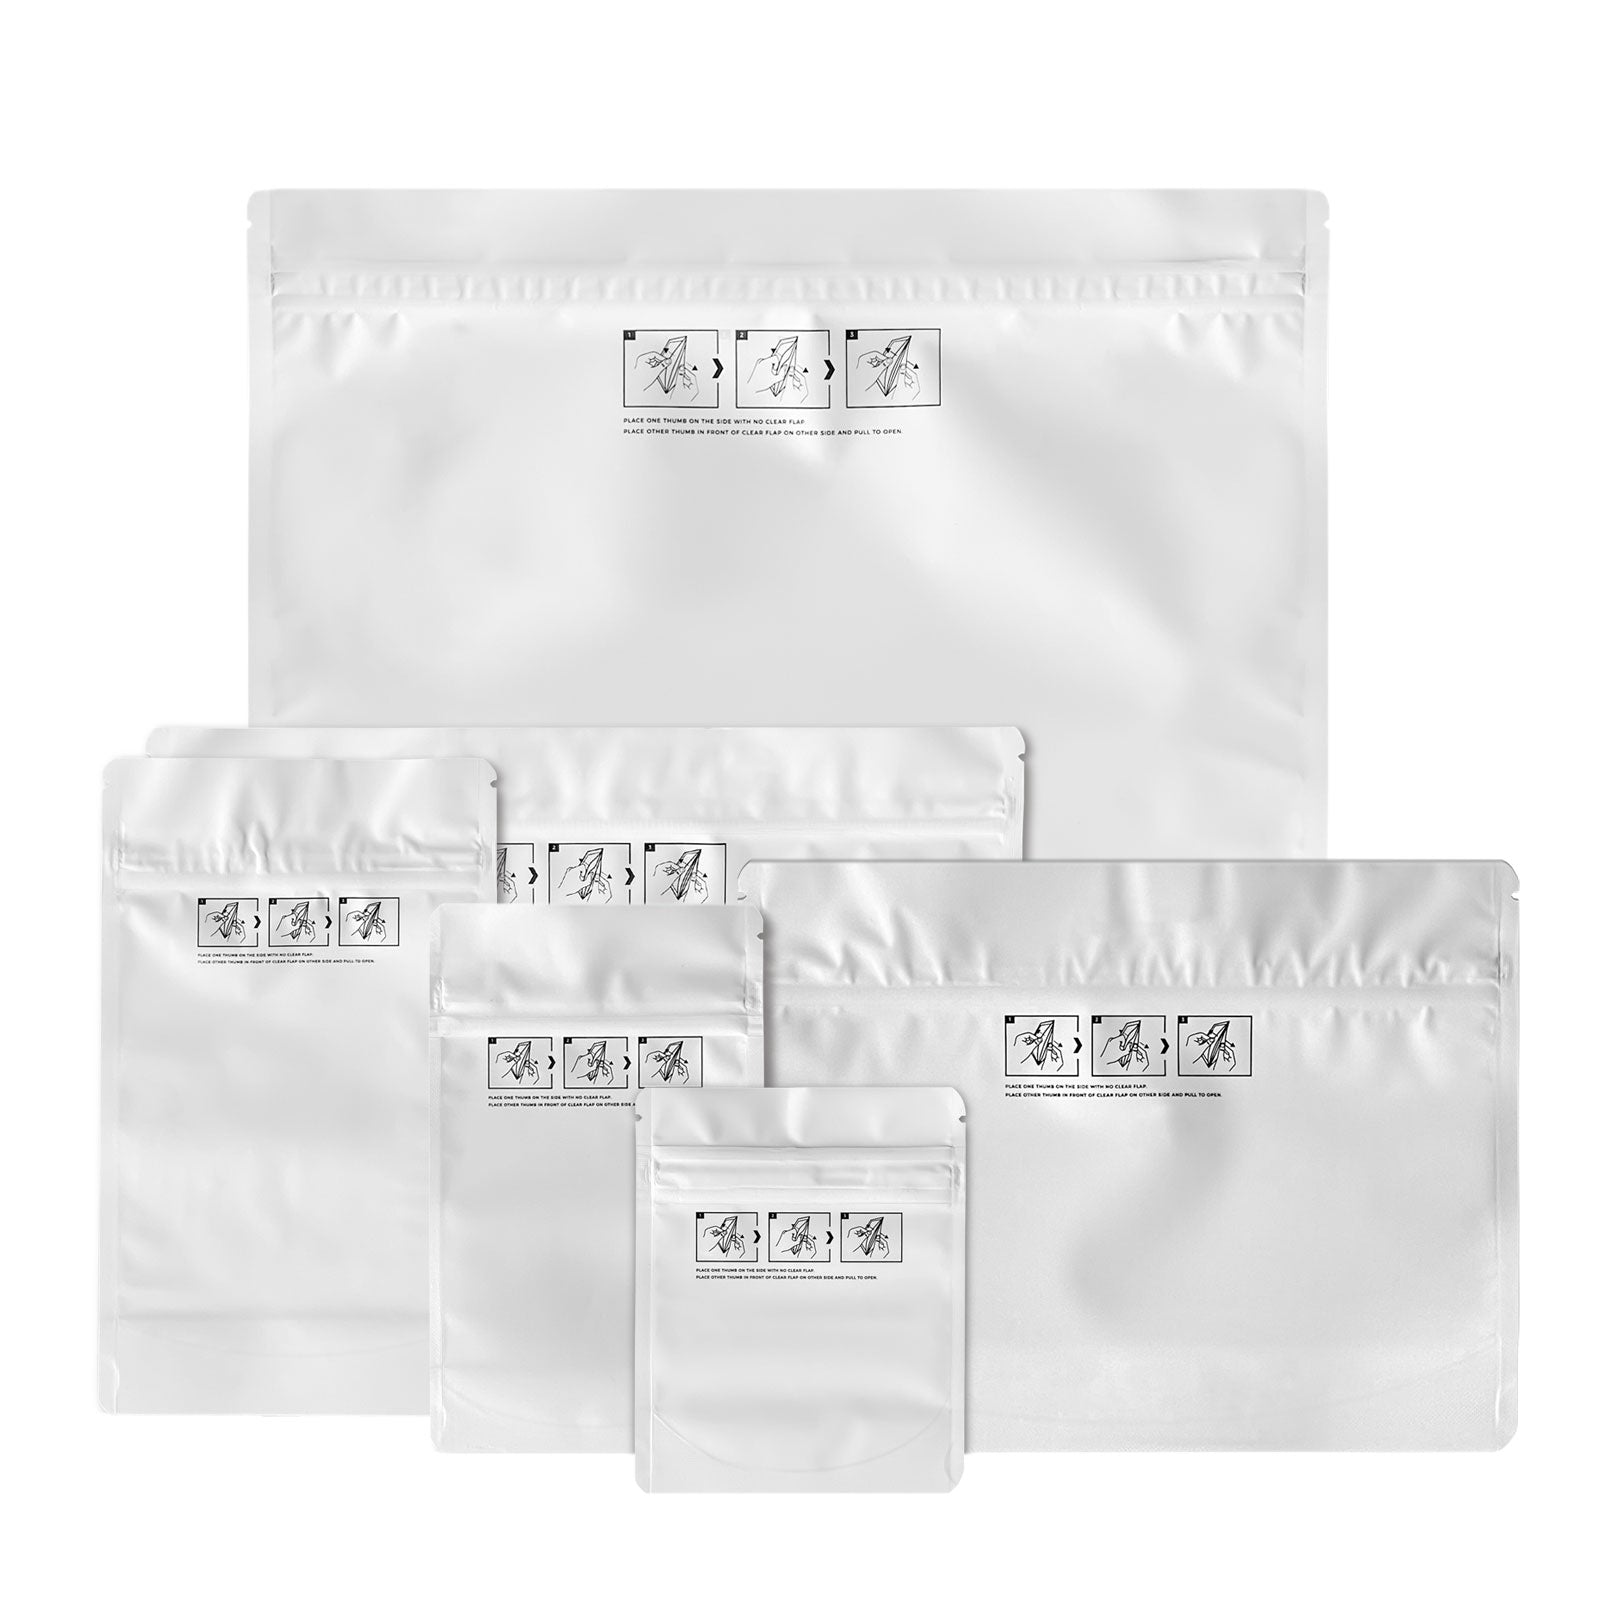 1/8 Ounce Child Resistant Bags White/Clear 4"x5"+2" - 100 Count